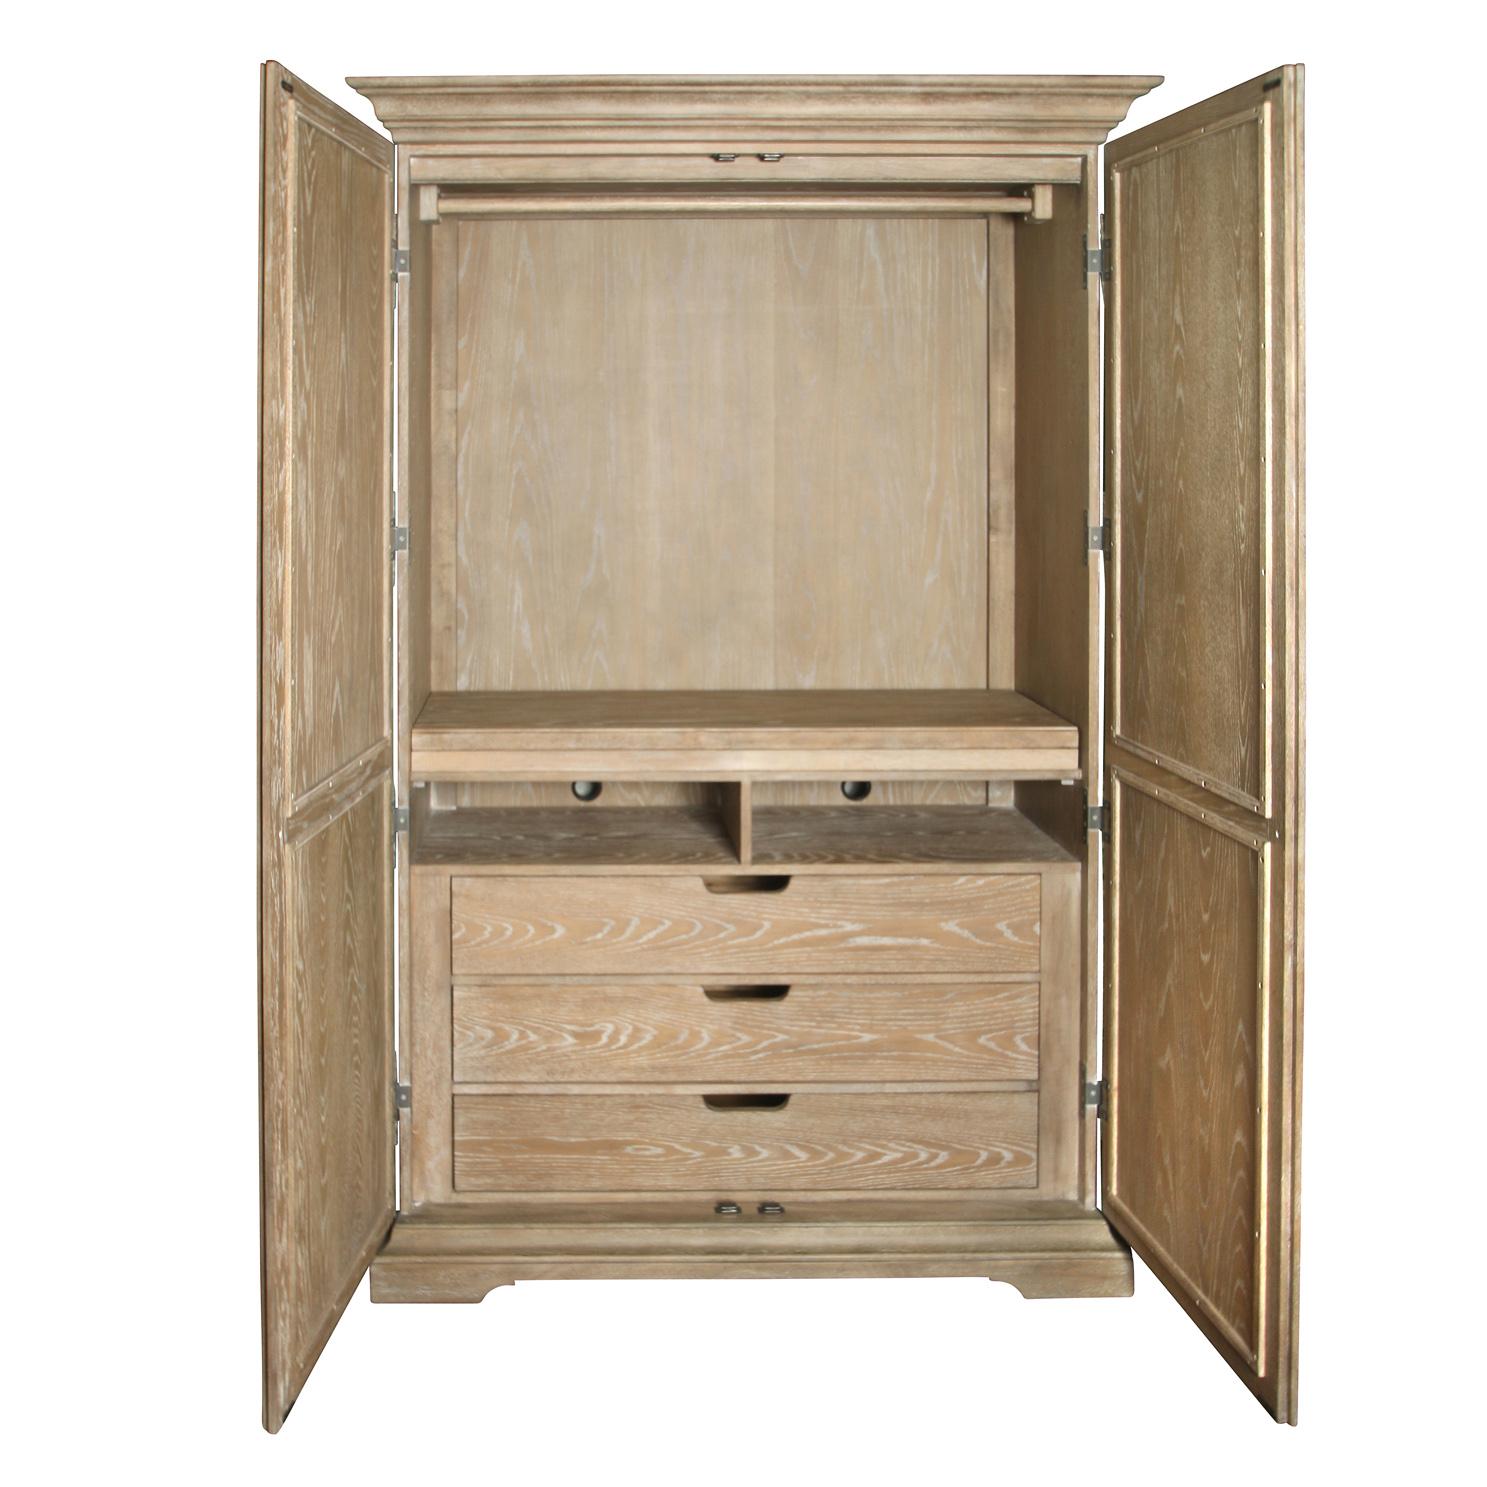 Stylized cerused oak mirrored front armoire with plenty of storage, hanging bar and drawer inside. From Bernhardt.